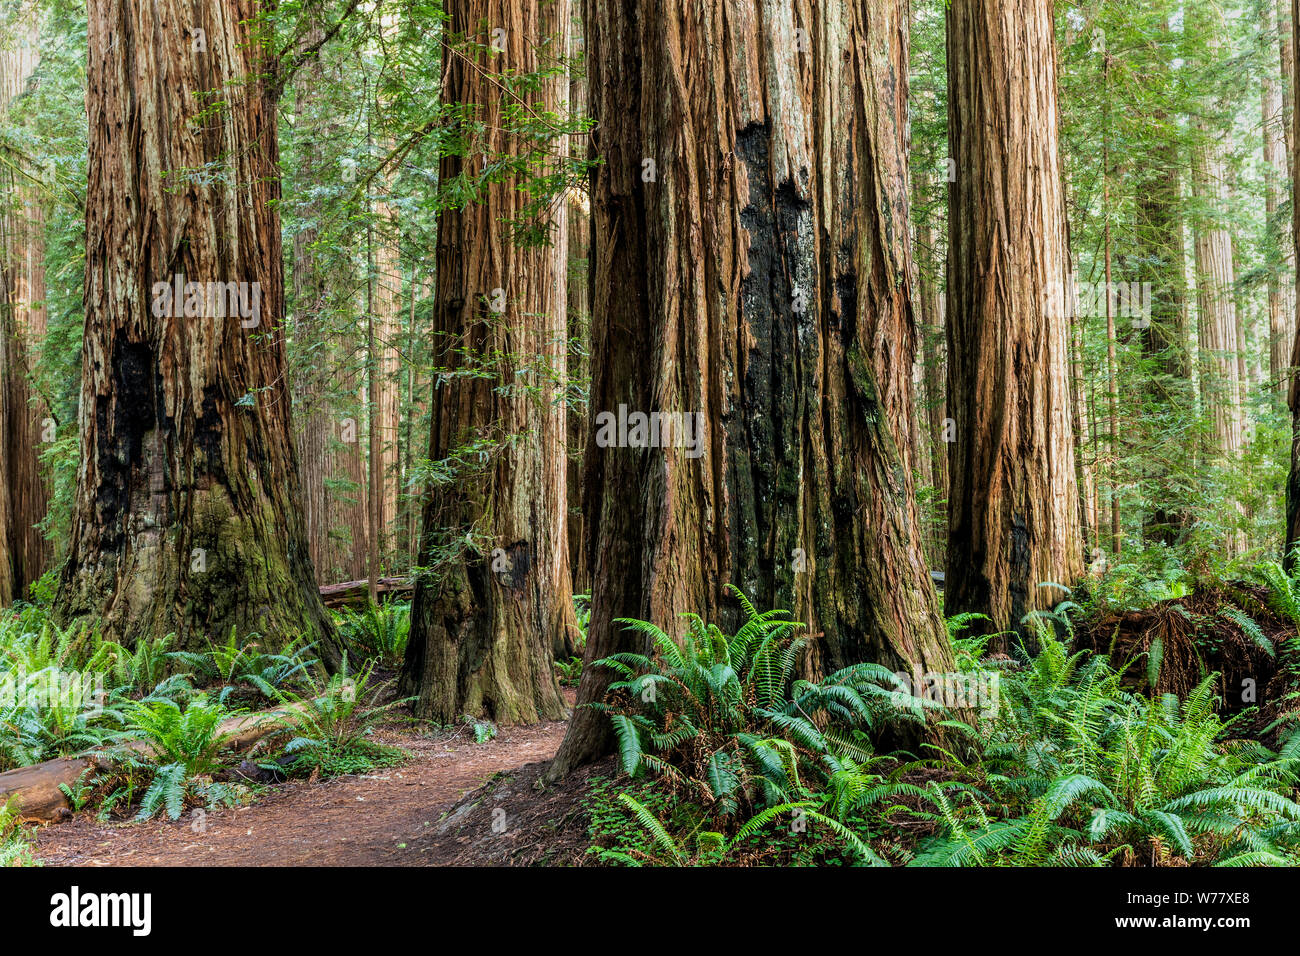 CA03454-00...CALIFORNIA - Stout Grove in Jediah Smith Redwoods State Park along the Redwood Coast. Stock Photo